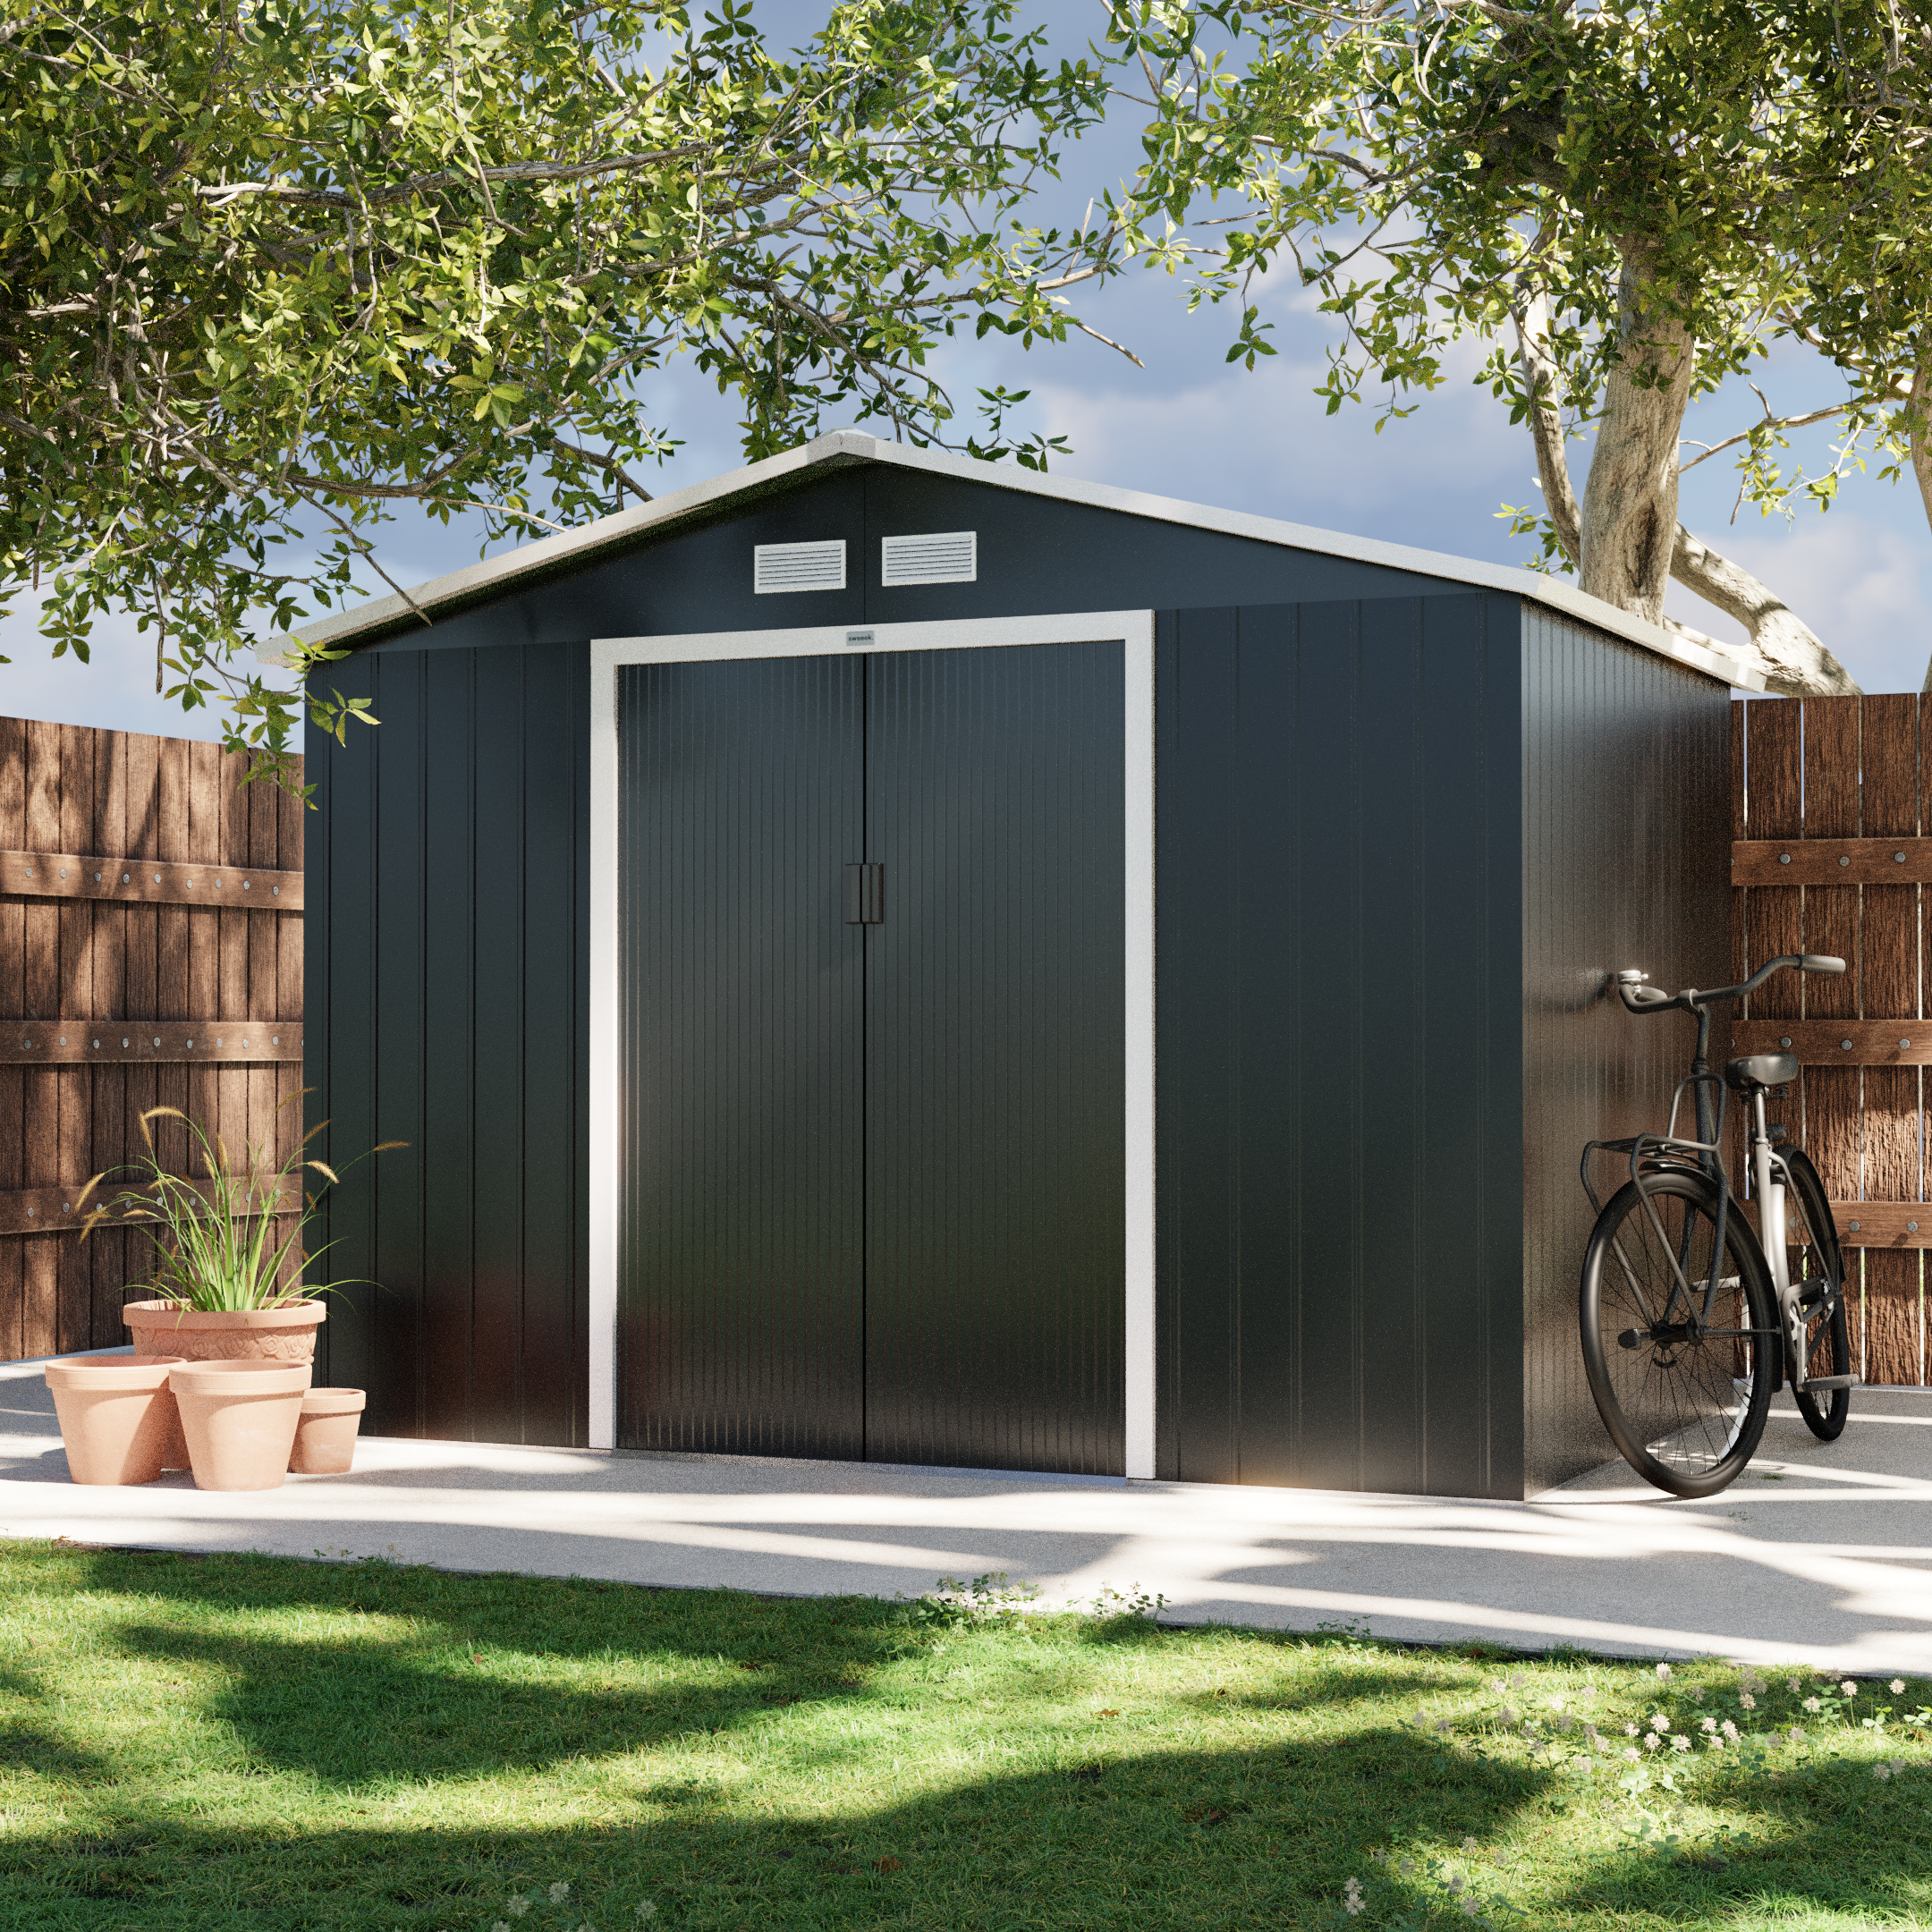 (9 X 6FT) 5.39m² Metal garden shed - Tool shed with single latch door, ground fixing kit supplied - Ferrain - Grey and White,sweeek,Photo1